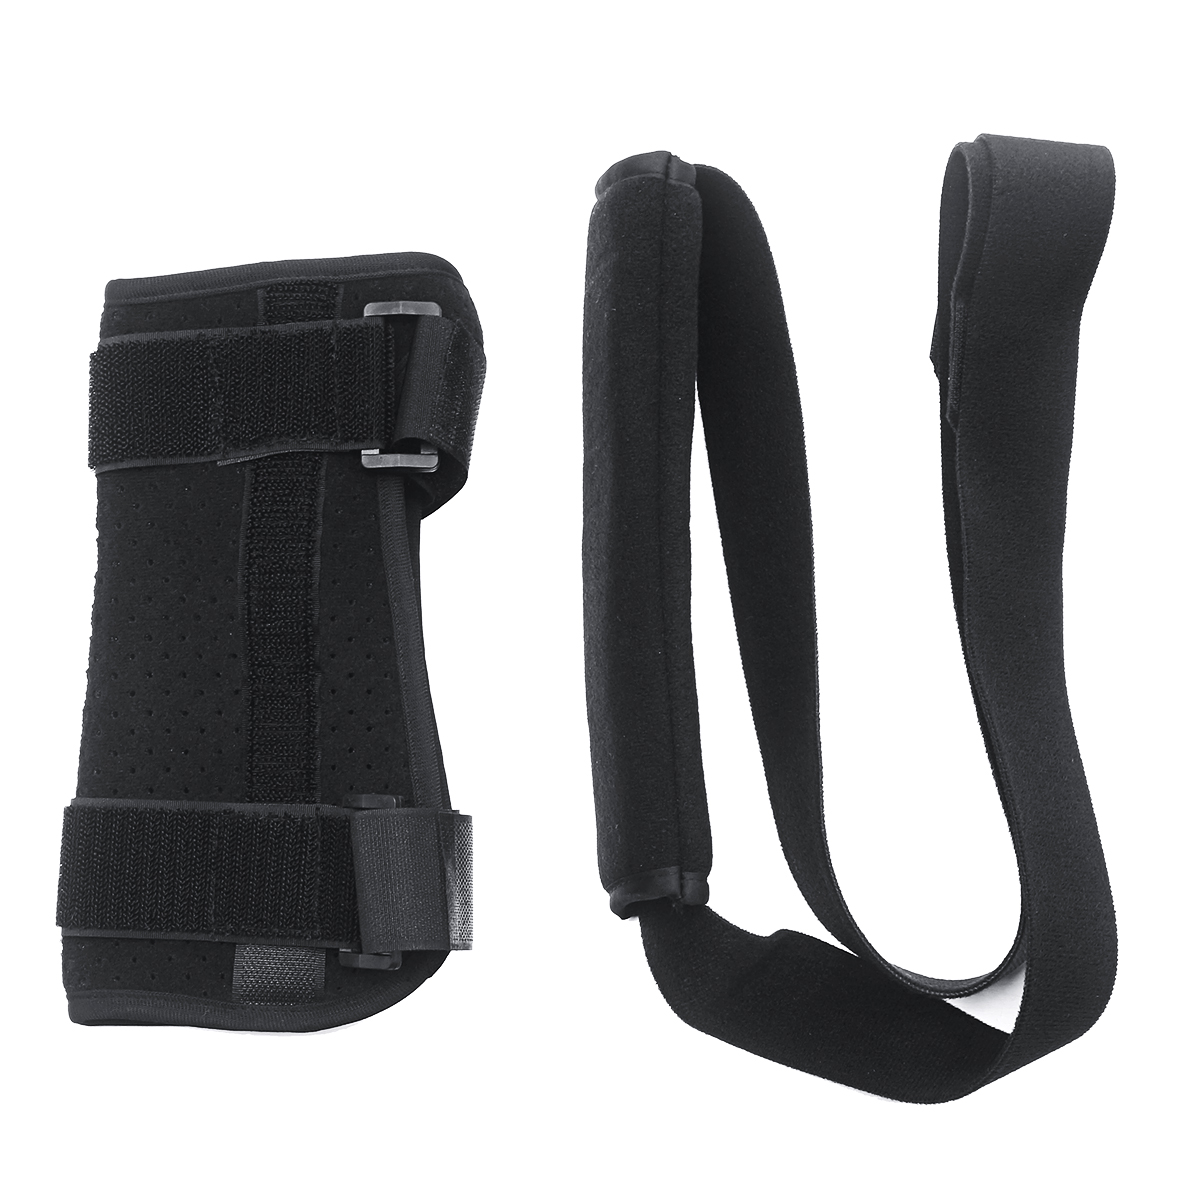 Breathable-Adjustable-Wrist-Support-Wrist-Brace-Wrist-Joint-Fixation-Sprain-Protector-Medical-Protec-1571406-2